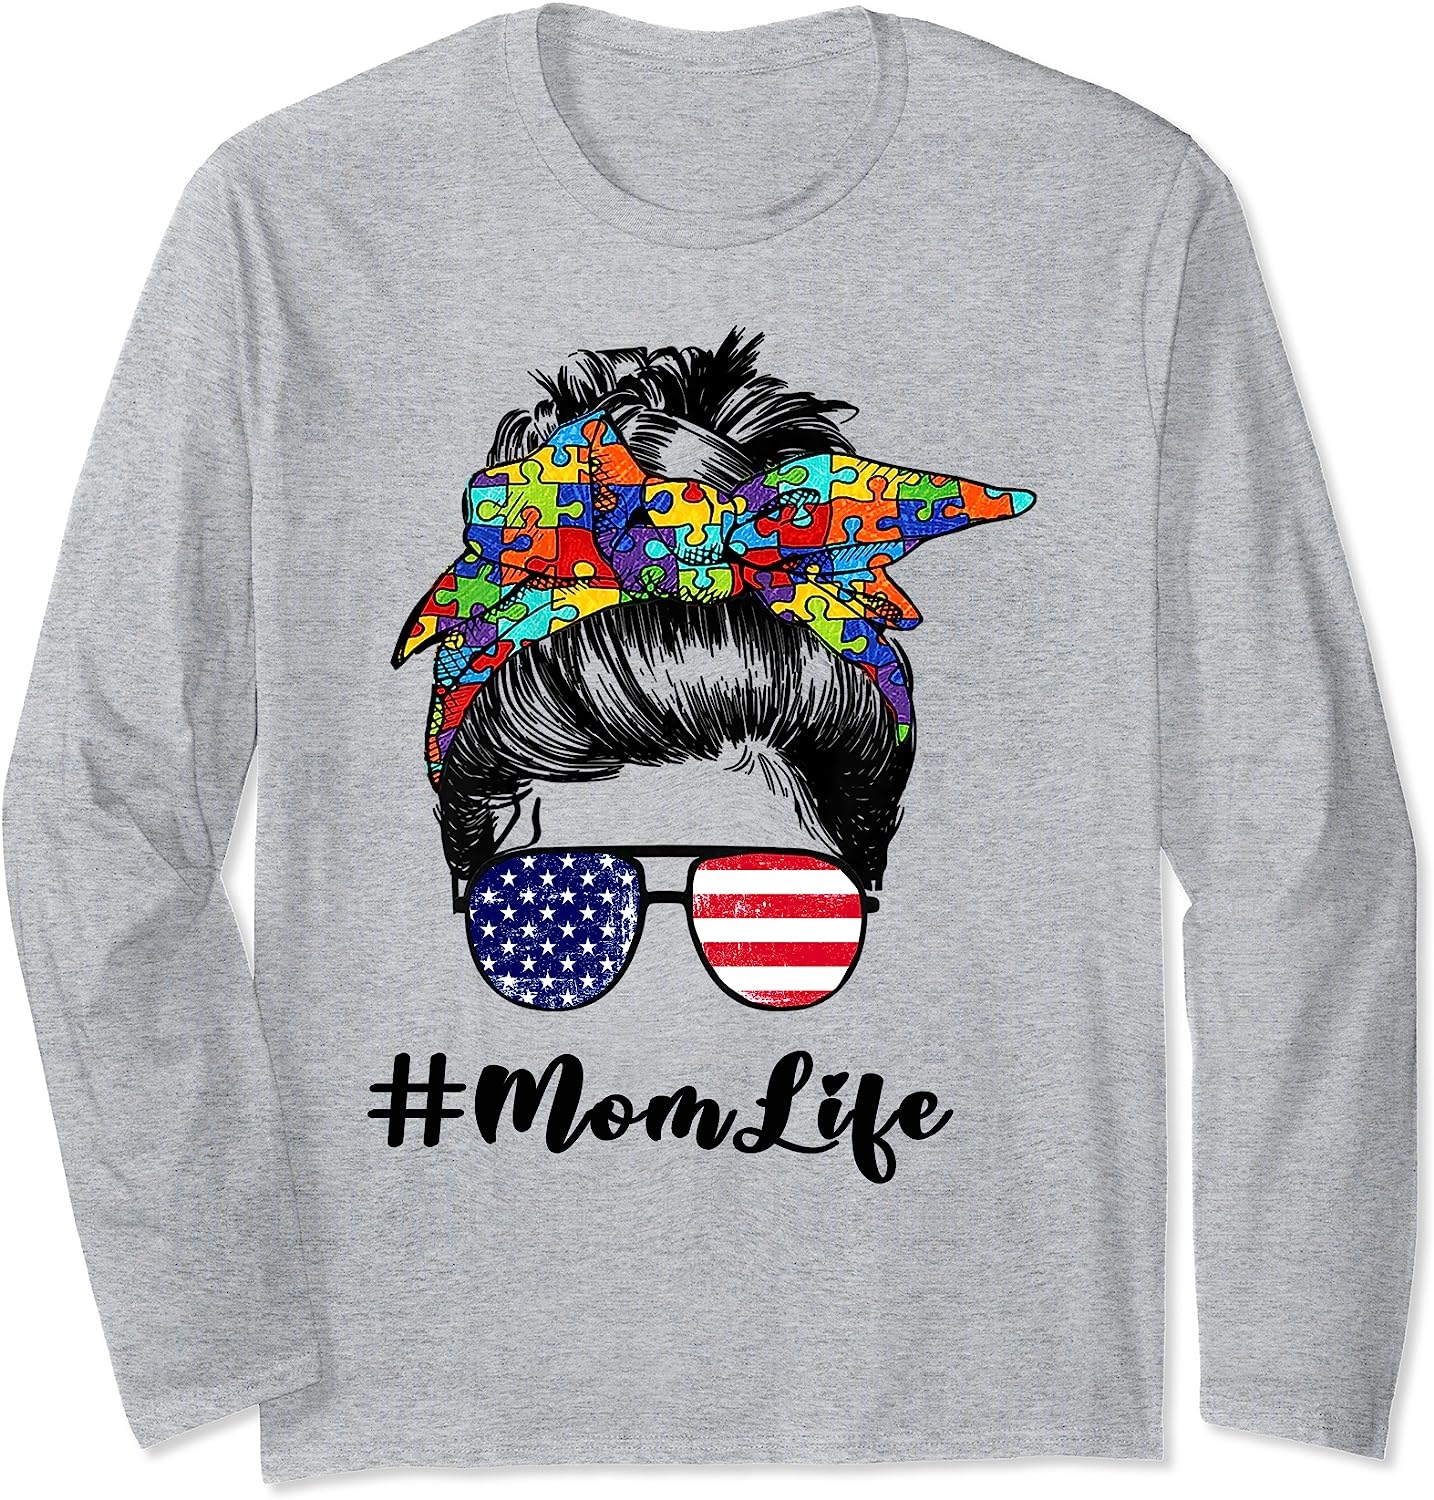 The Autism Mom Life Tired as Messi Hair Flag American Funny Long Sleeve T-Shirt   price checker   price checker Description